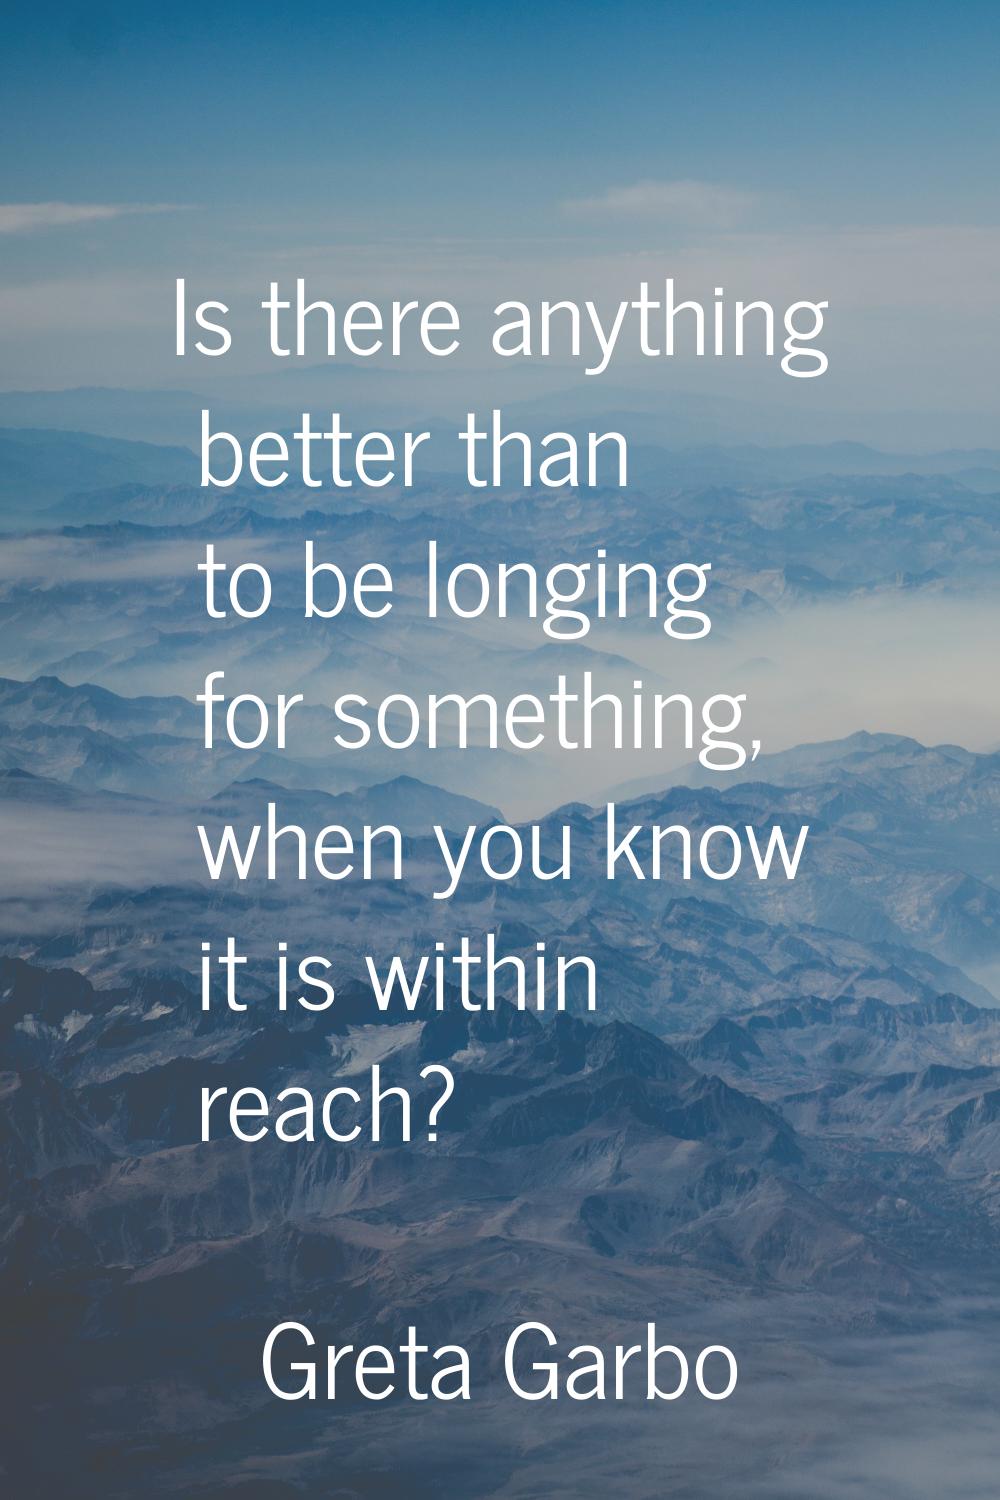 Is there anything better than to be longing for something, when you know it is within reach?